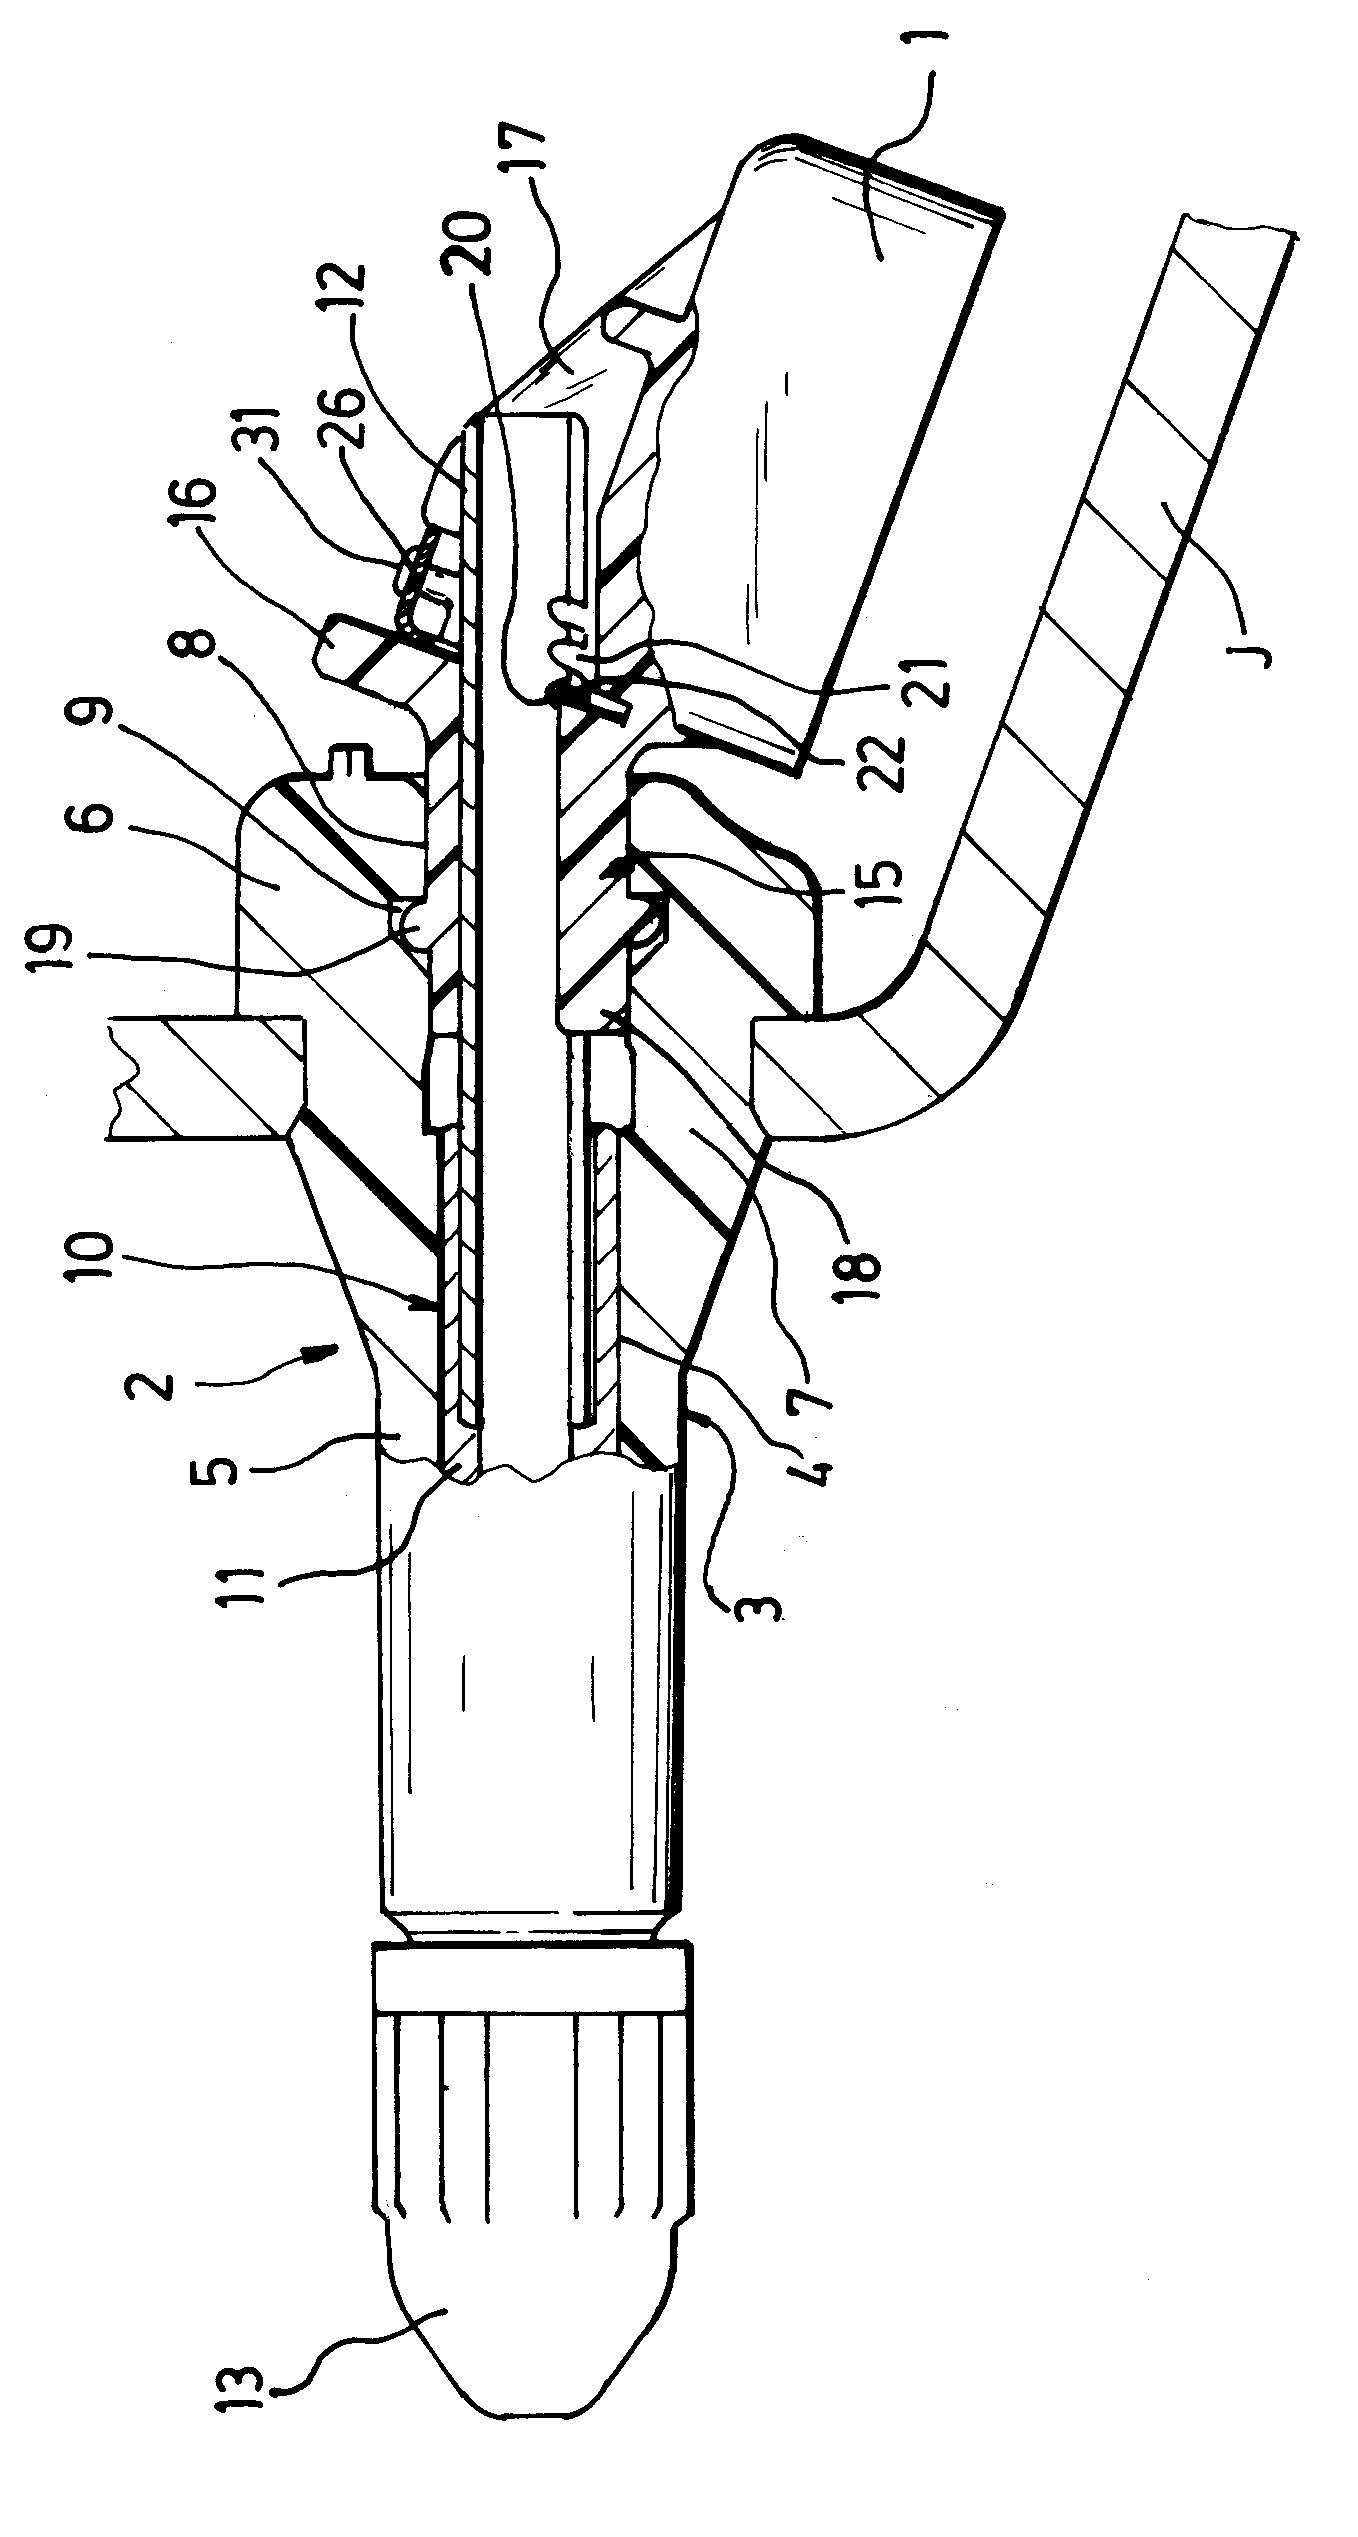 Electronic unit for measuring the operation parameters of a vehicle wheel including an electronic housing and an inflation valve